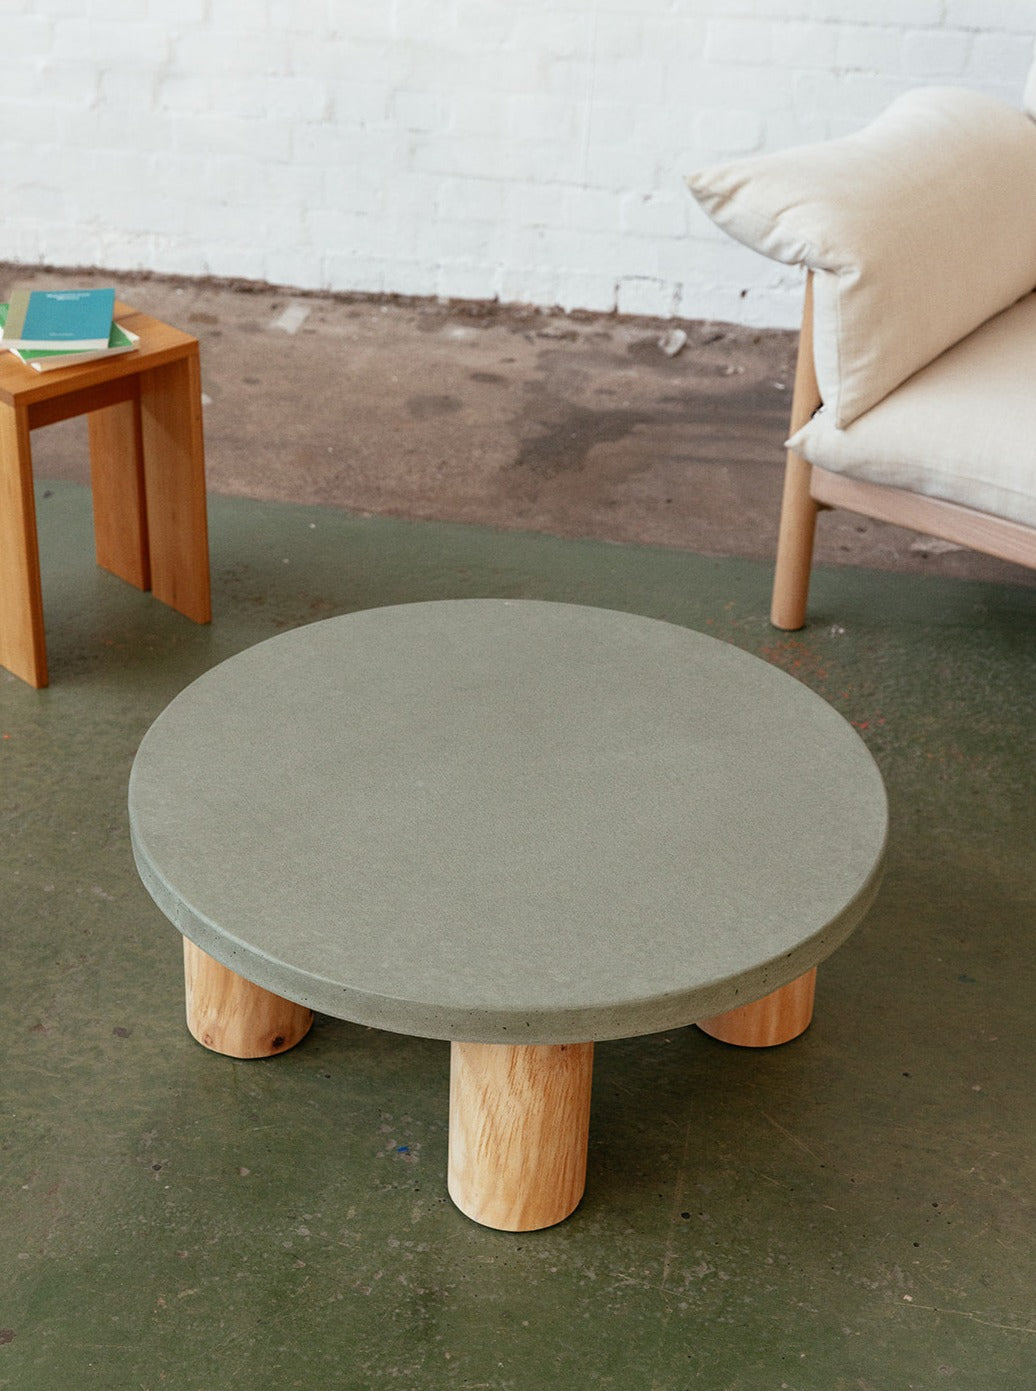 Off-Form table, Timber